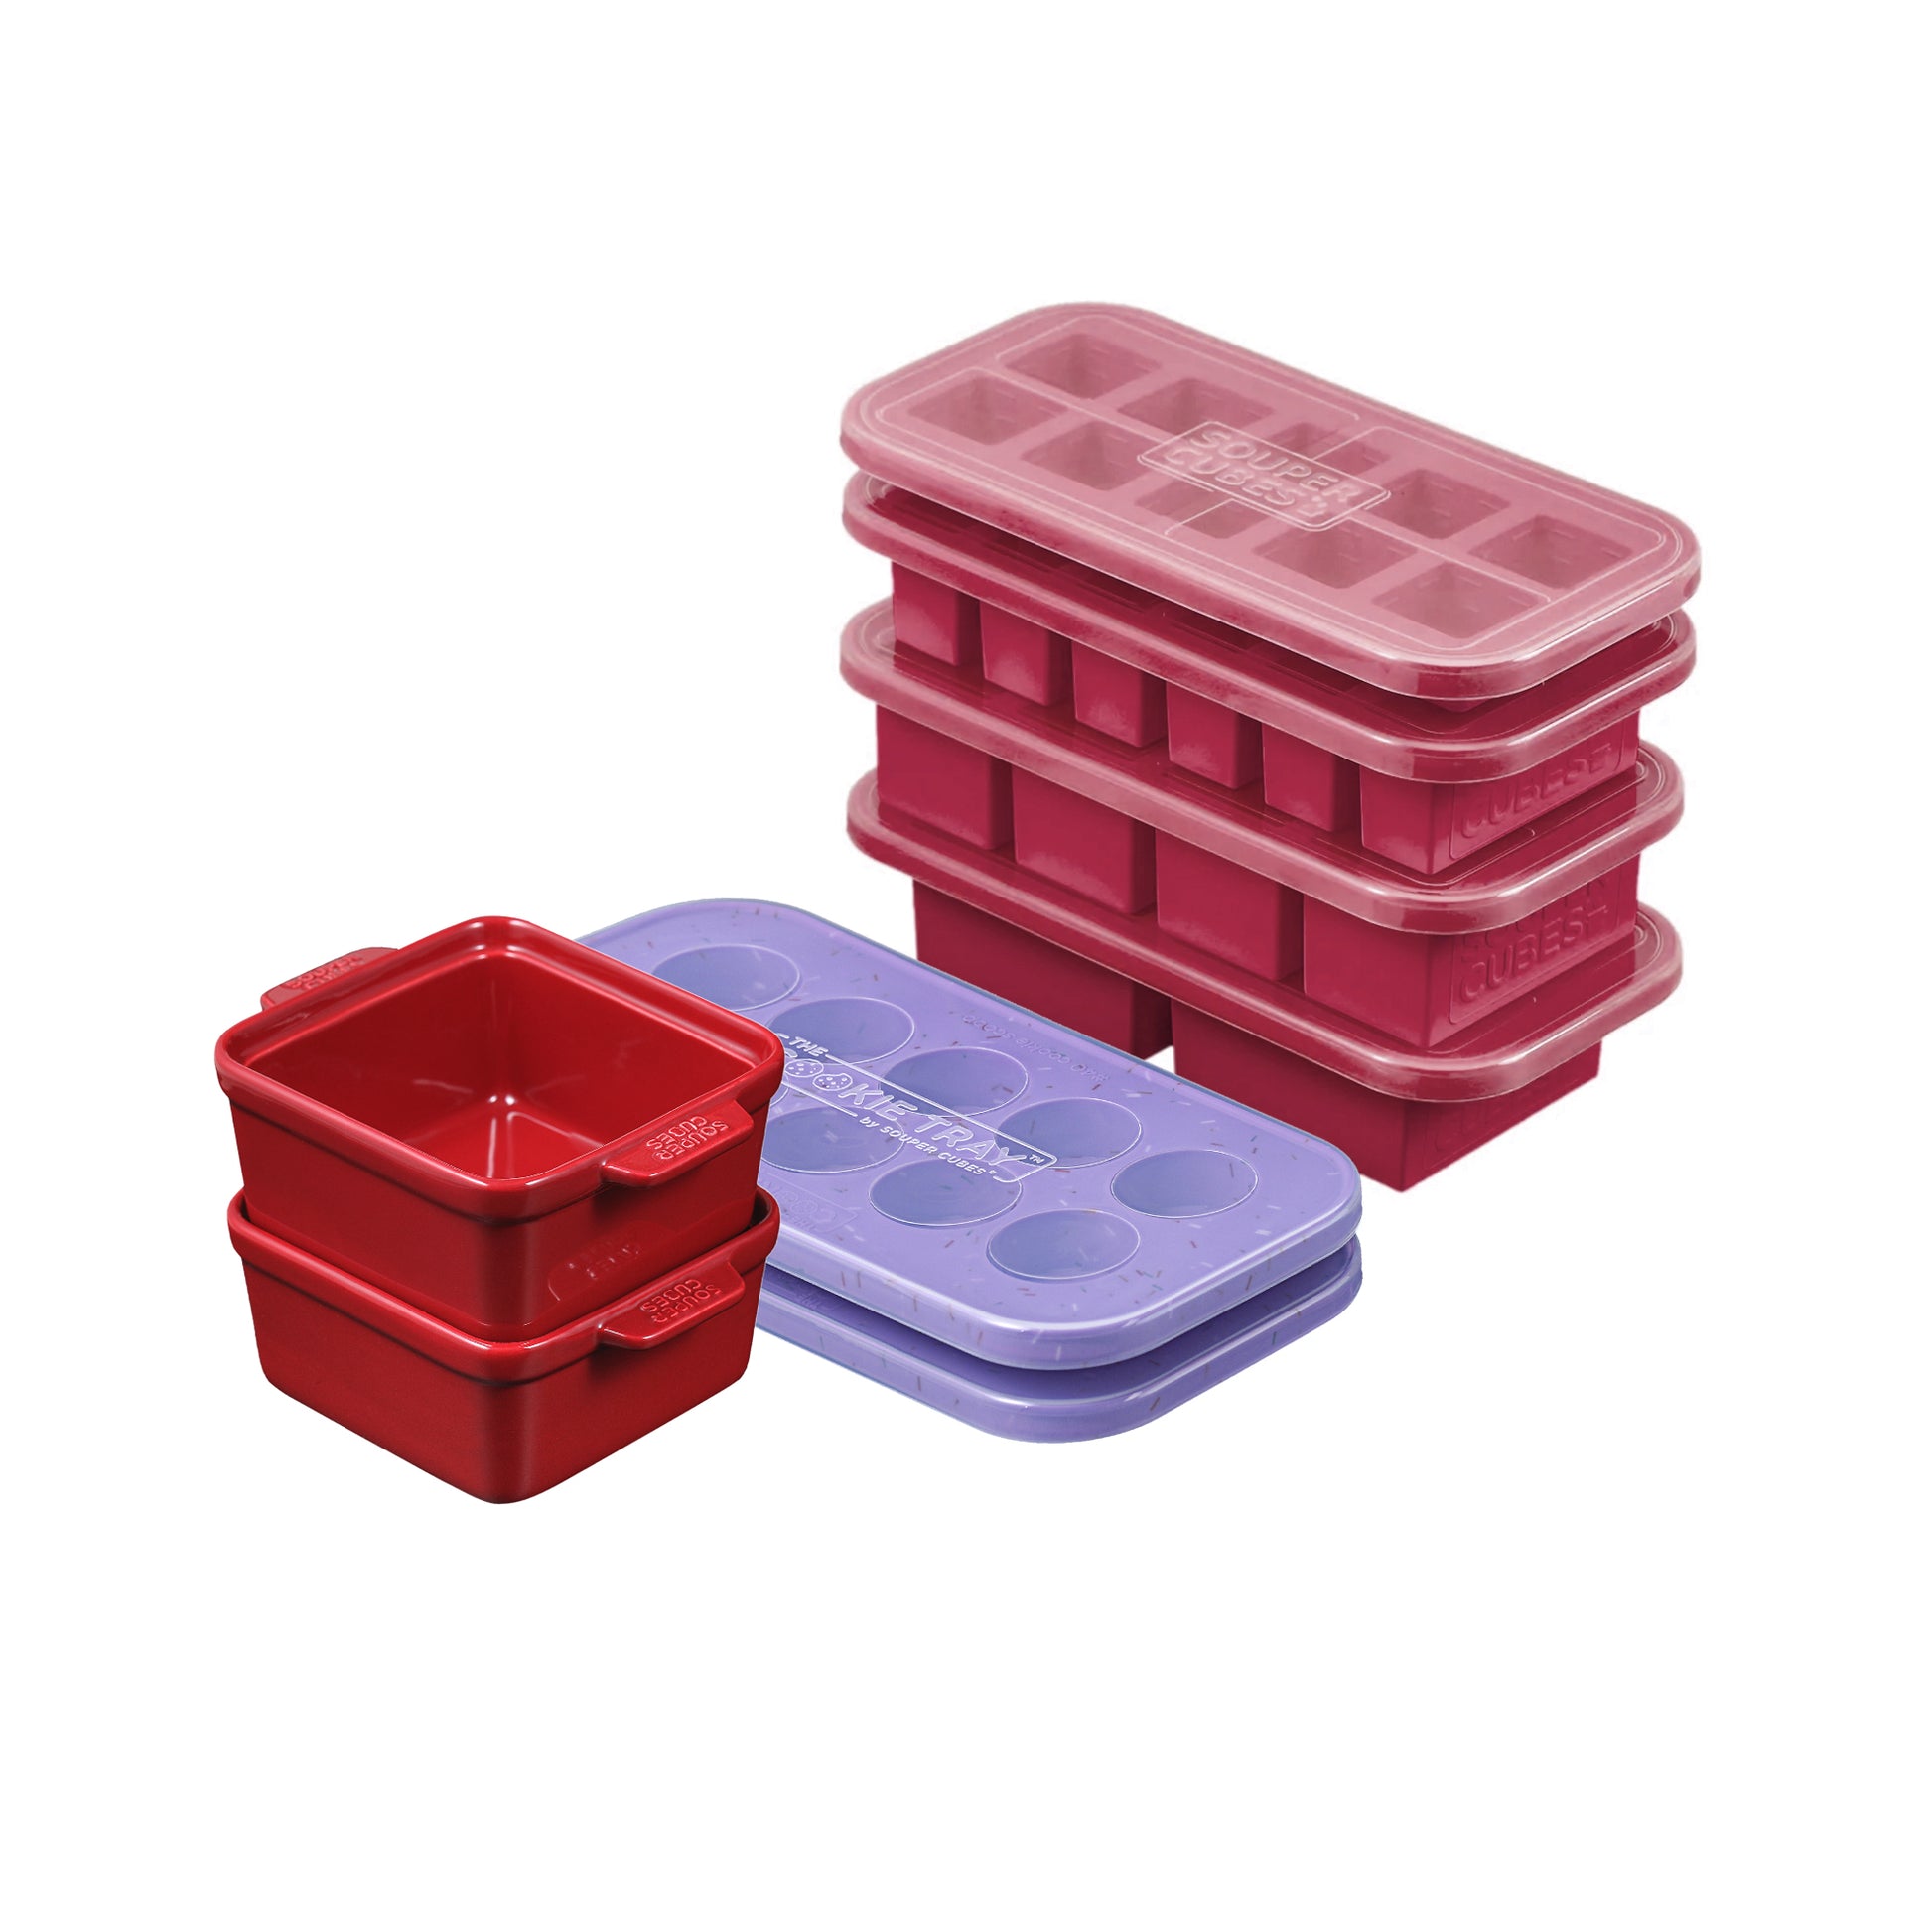 Plastic Trays - Set Of 6 - Primary Colors